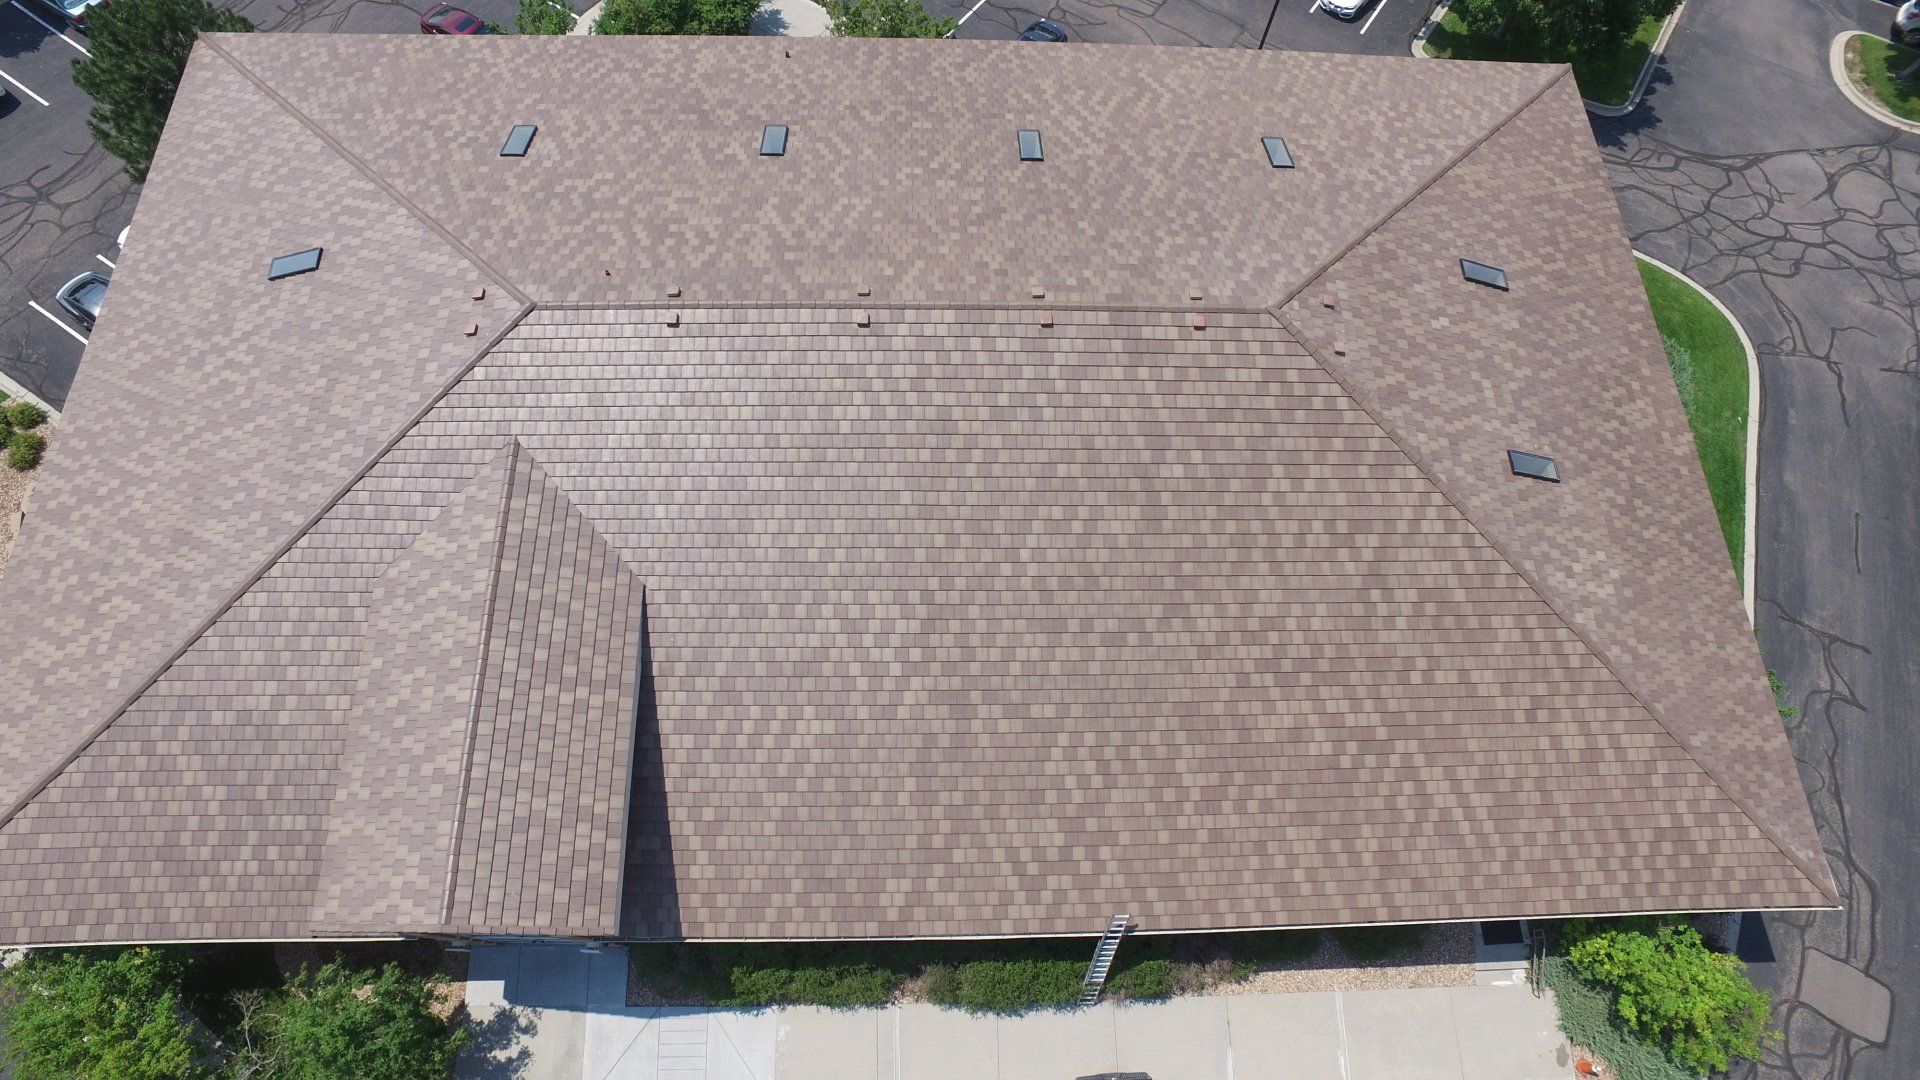 A freshly installed roof by Heritage Roofing & Contracting (aerial view).